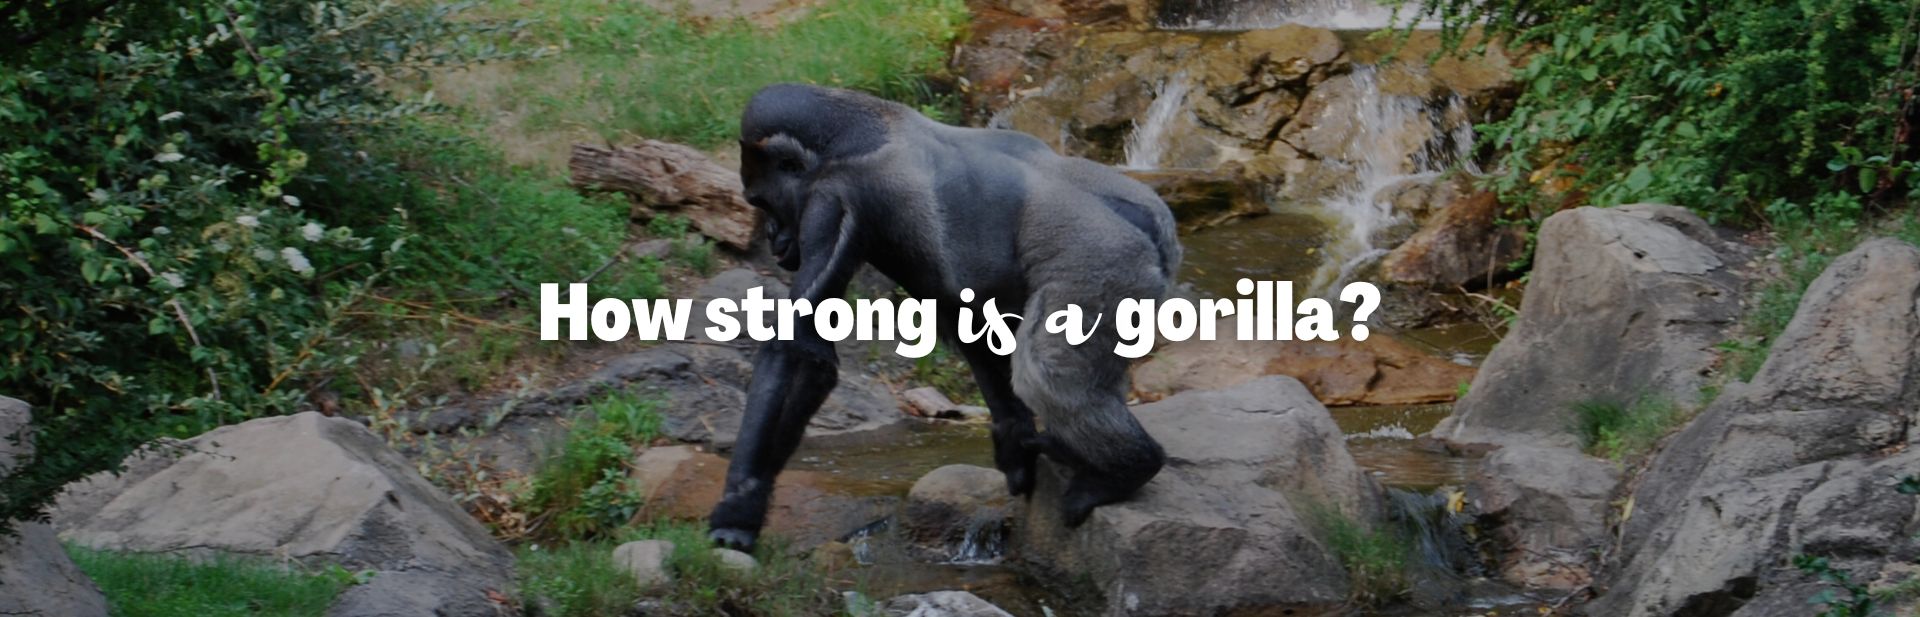 How Strong is a Gorilla? Discover the Astounding Power of Our Primate Cousins